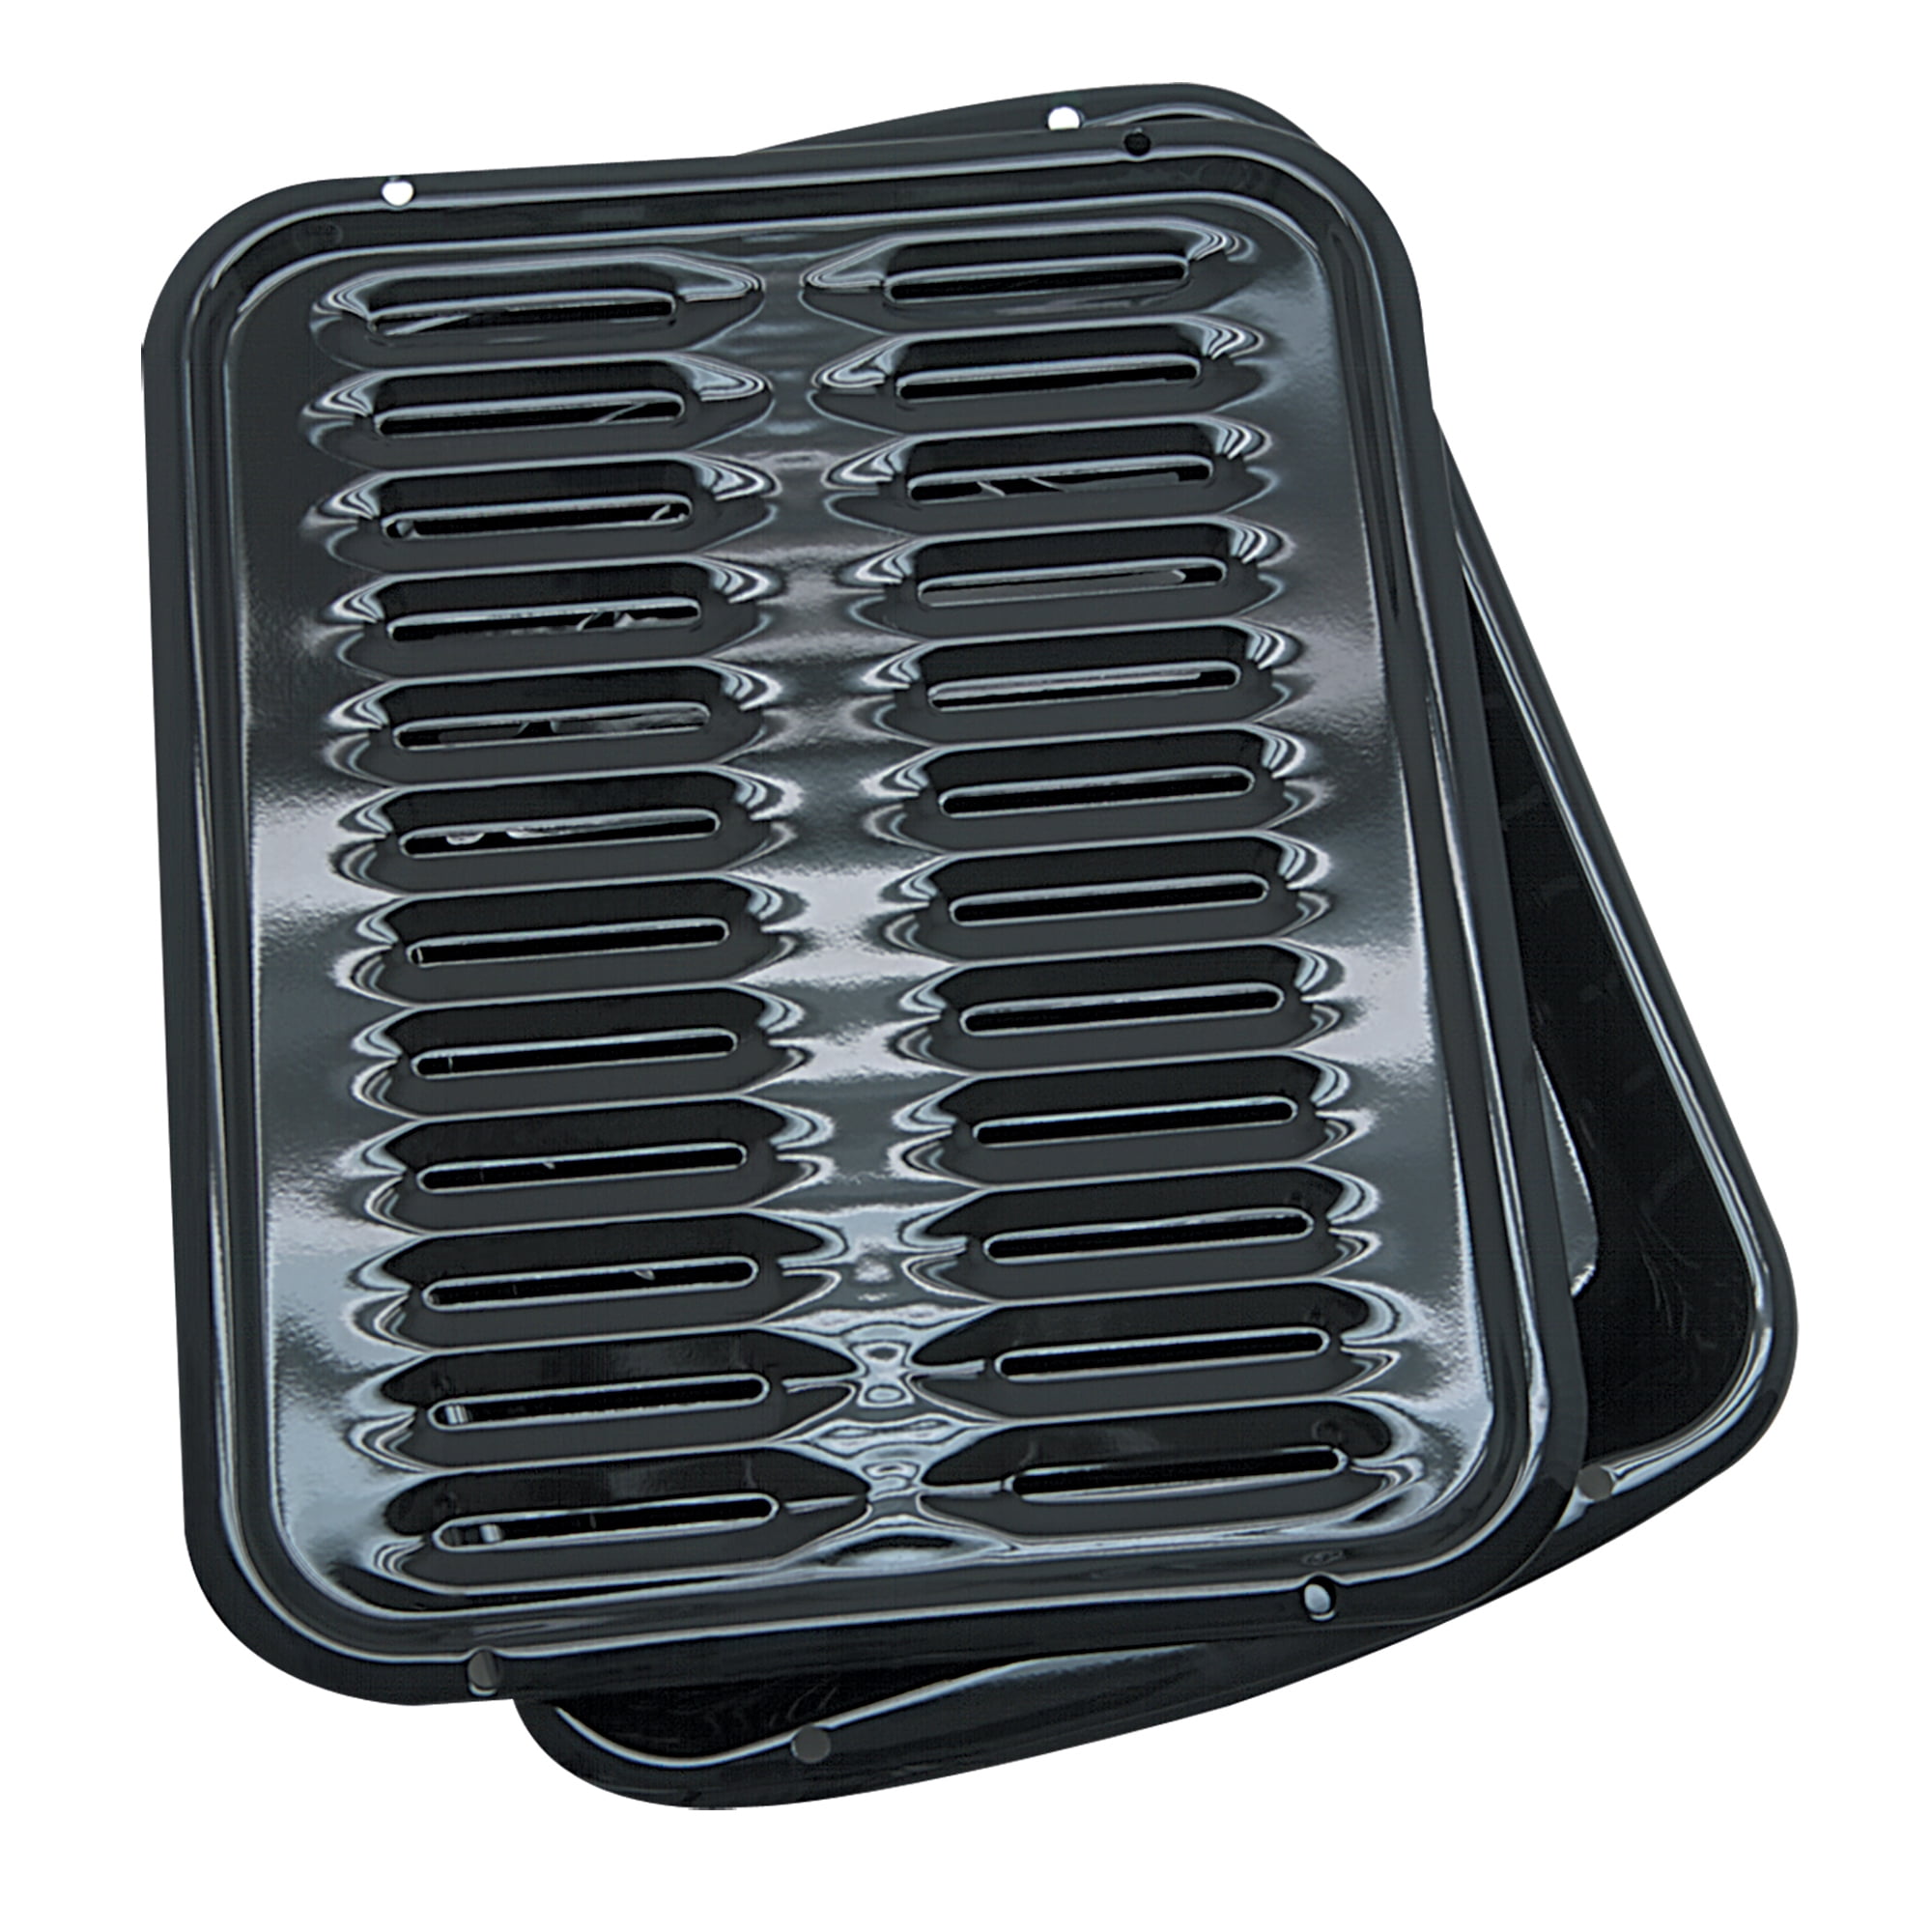 Ovente Oven Roasting Pan 13 x 9.4 Inch Stainless Steel Portable Baking Tray  with Rack and Handle, Silver, CWR23131S